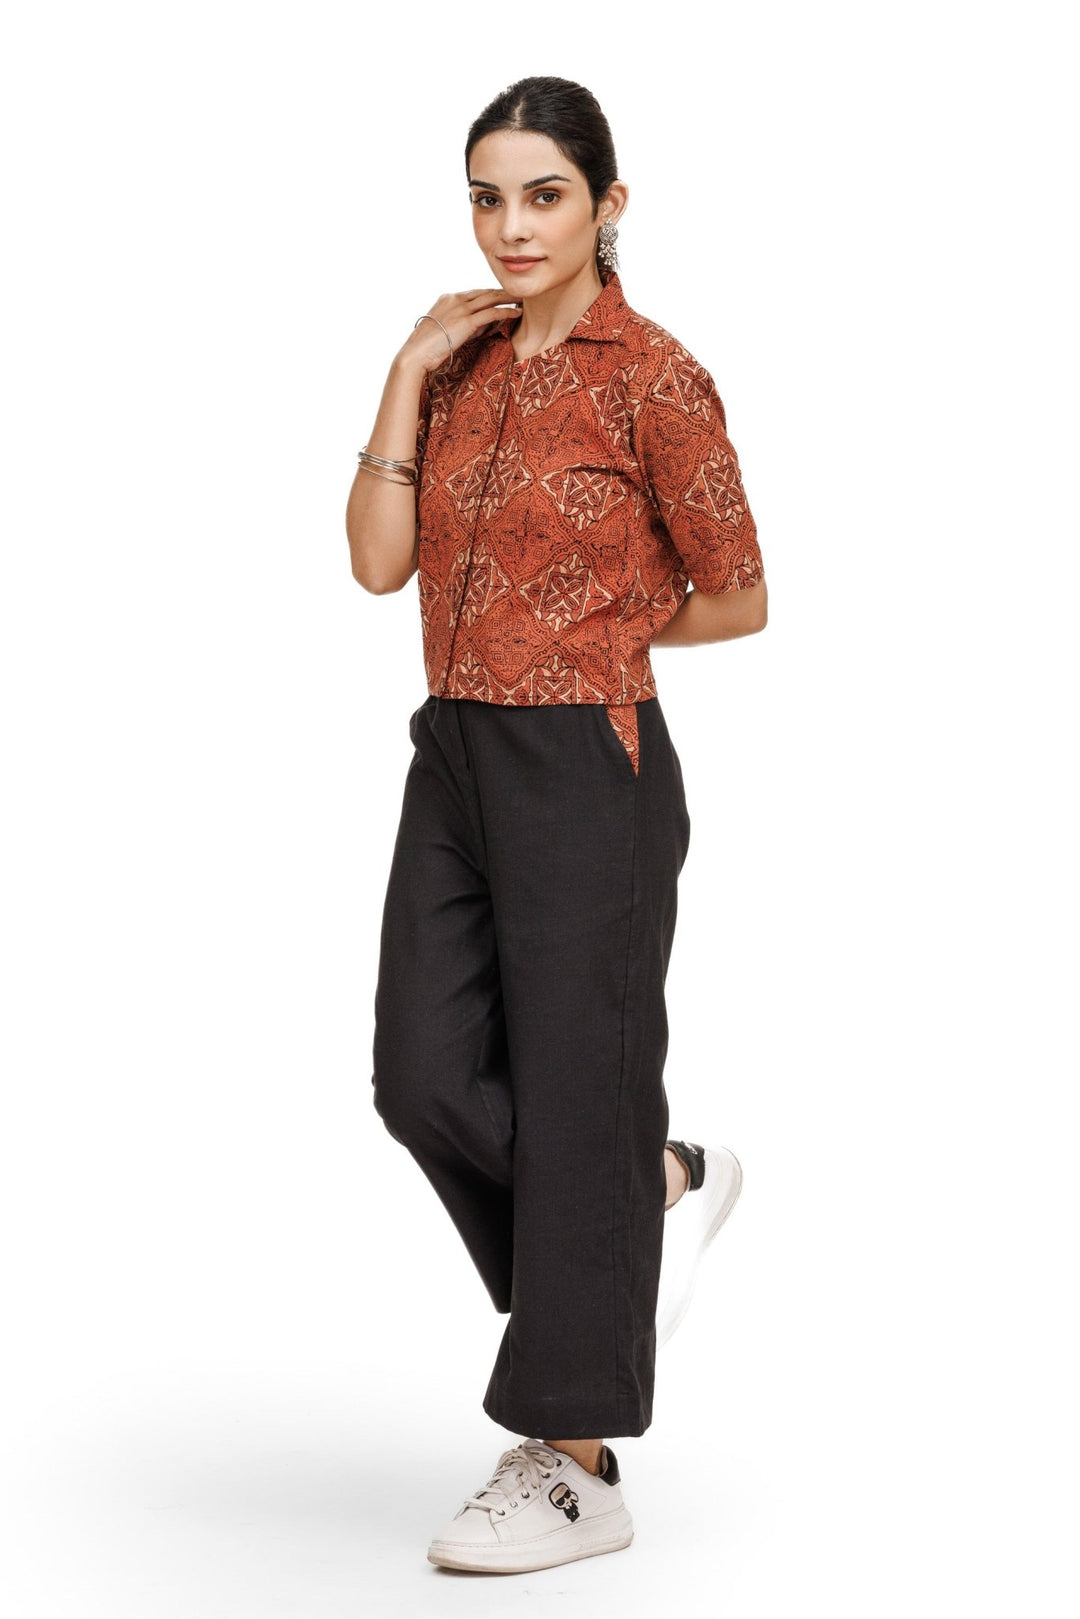 Fusion Ajrakh Crop Top With Handloom Pants / Culottes - womenswear -